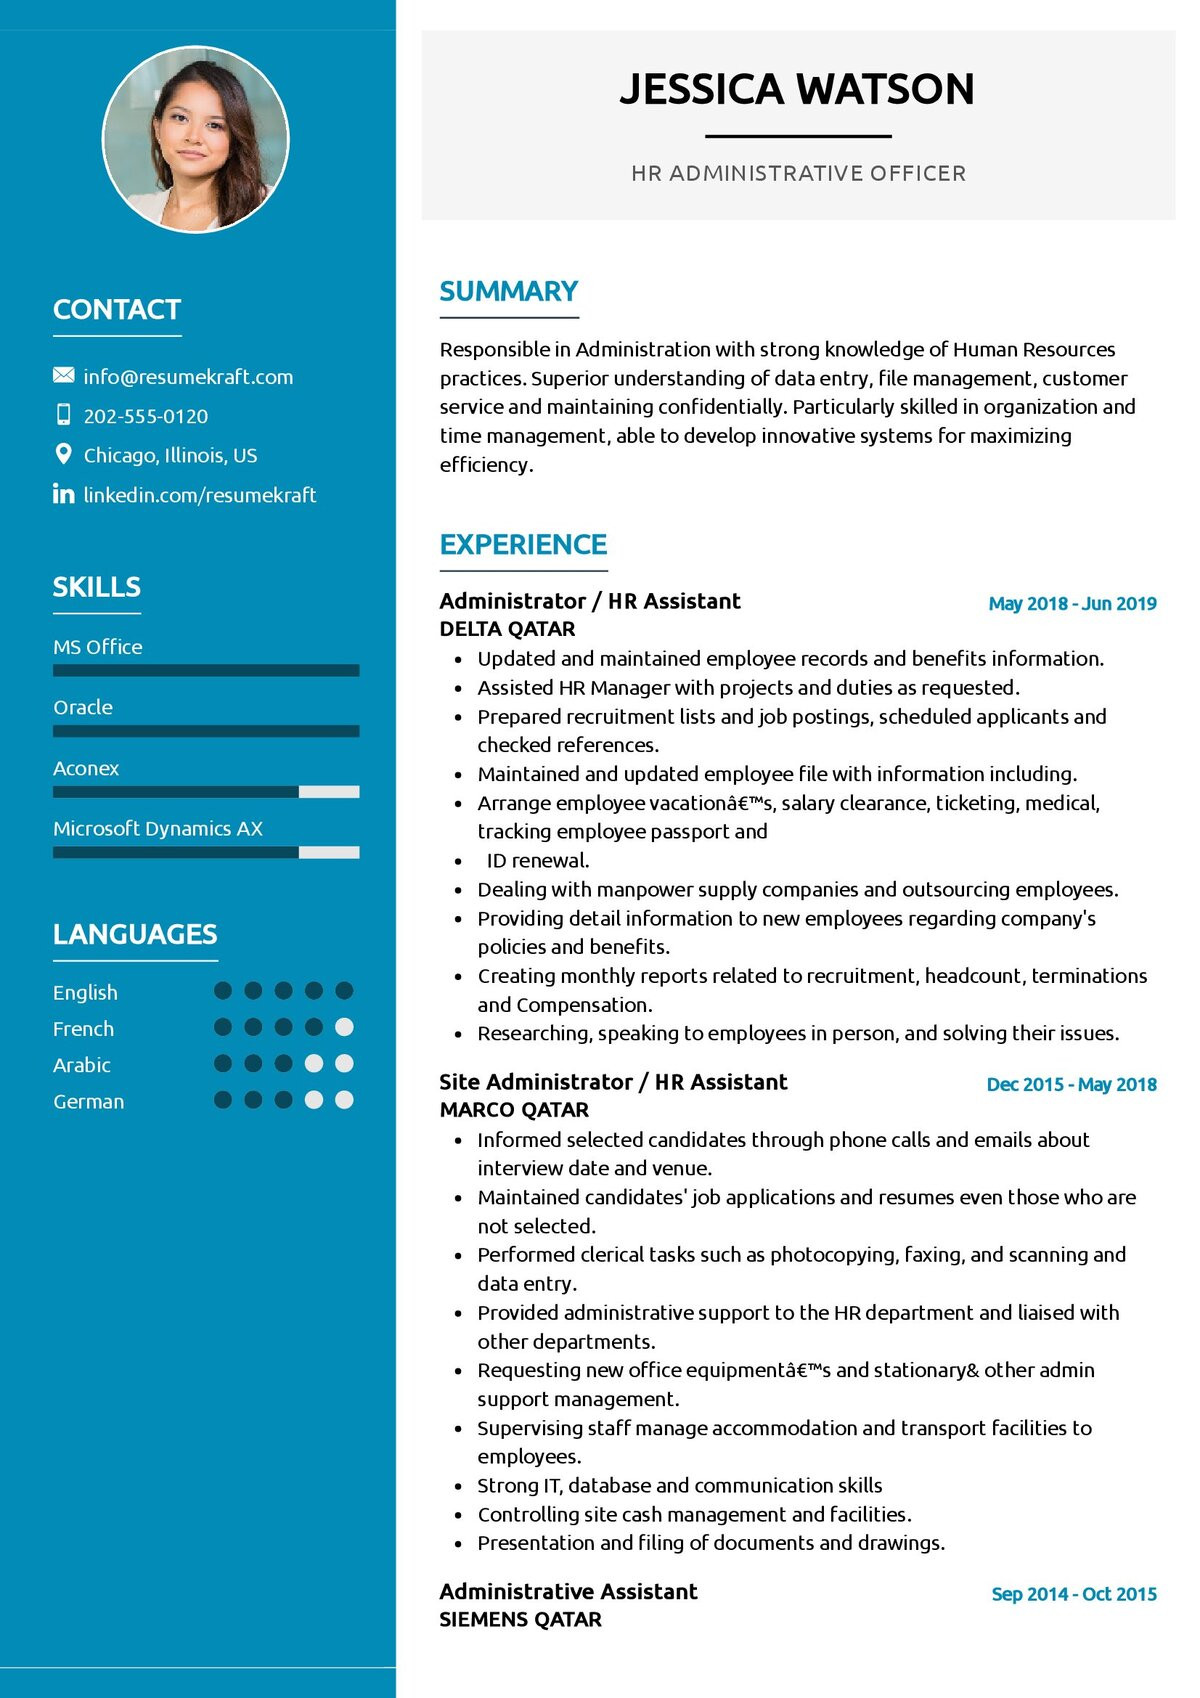 Sample Resume Administrative assistant Human Resources Hr Administrative Officer Resume 2022 Writing Tips – Resumekraft